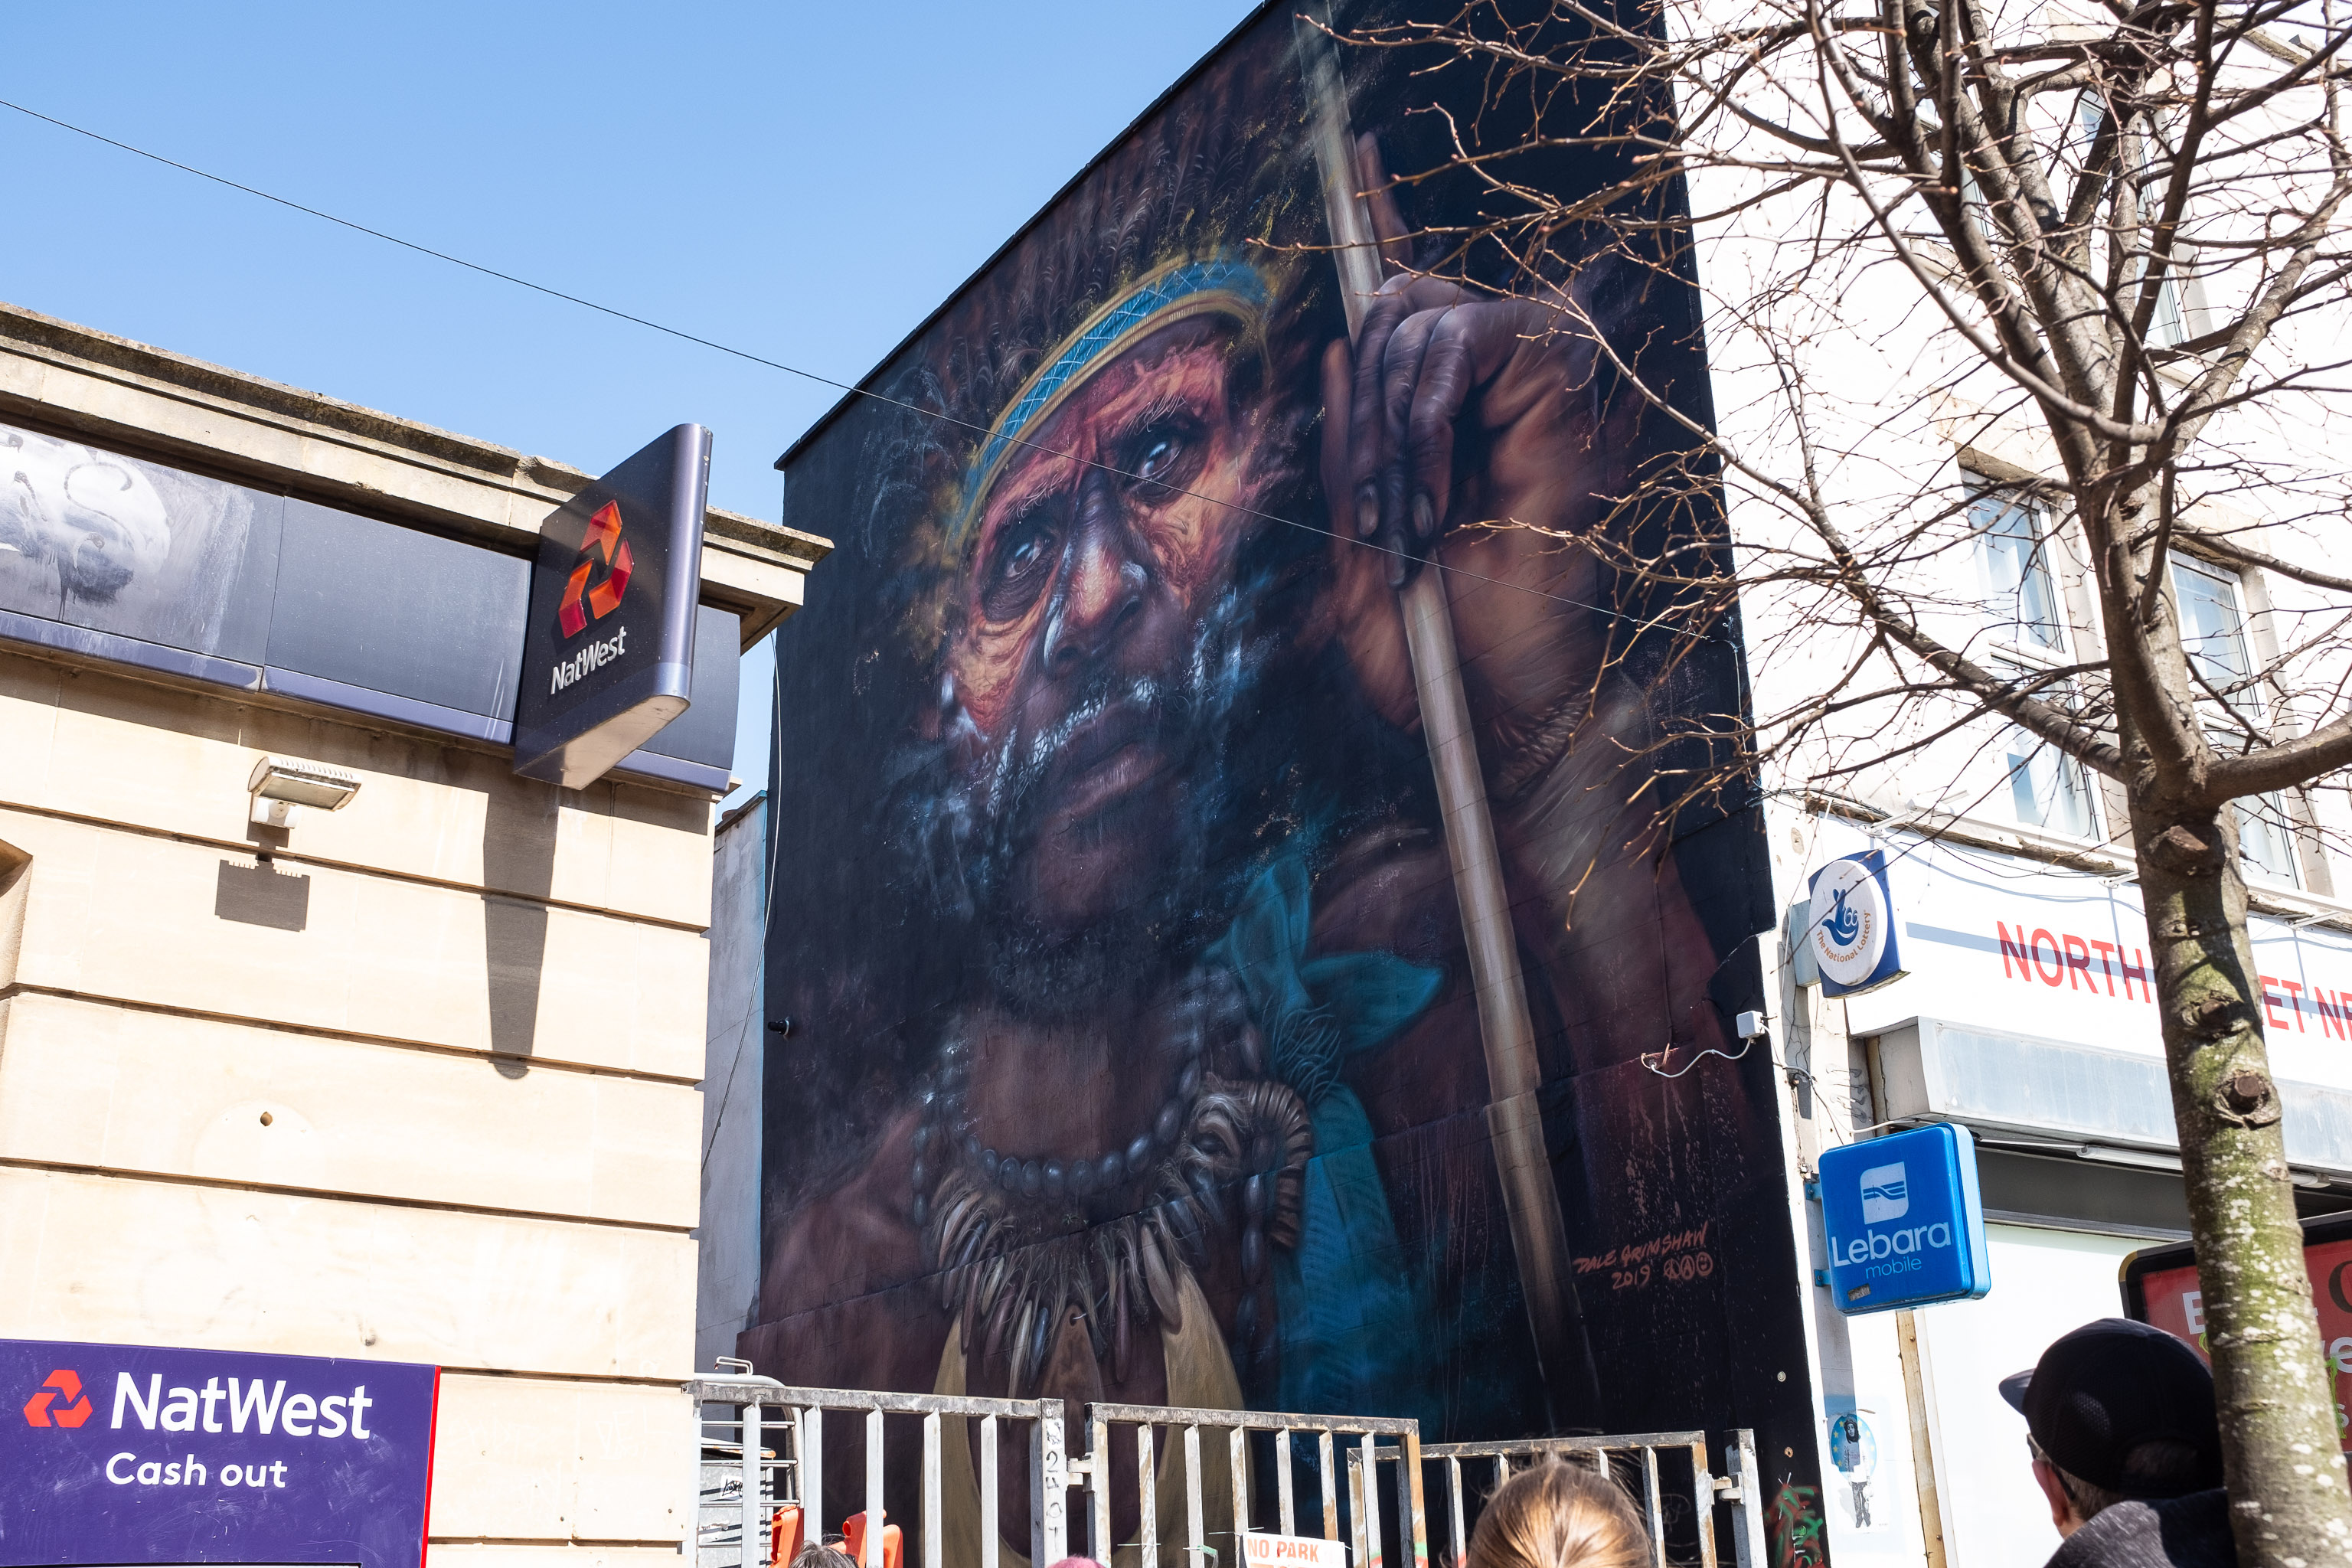 Free West Papua
A piece by Dale Grimshaw. There's a great little piece on this here at Diff Graff, including some details of the migrating swarm of bees that inter...